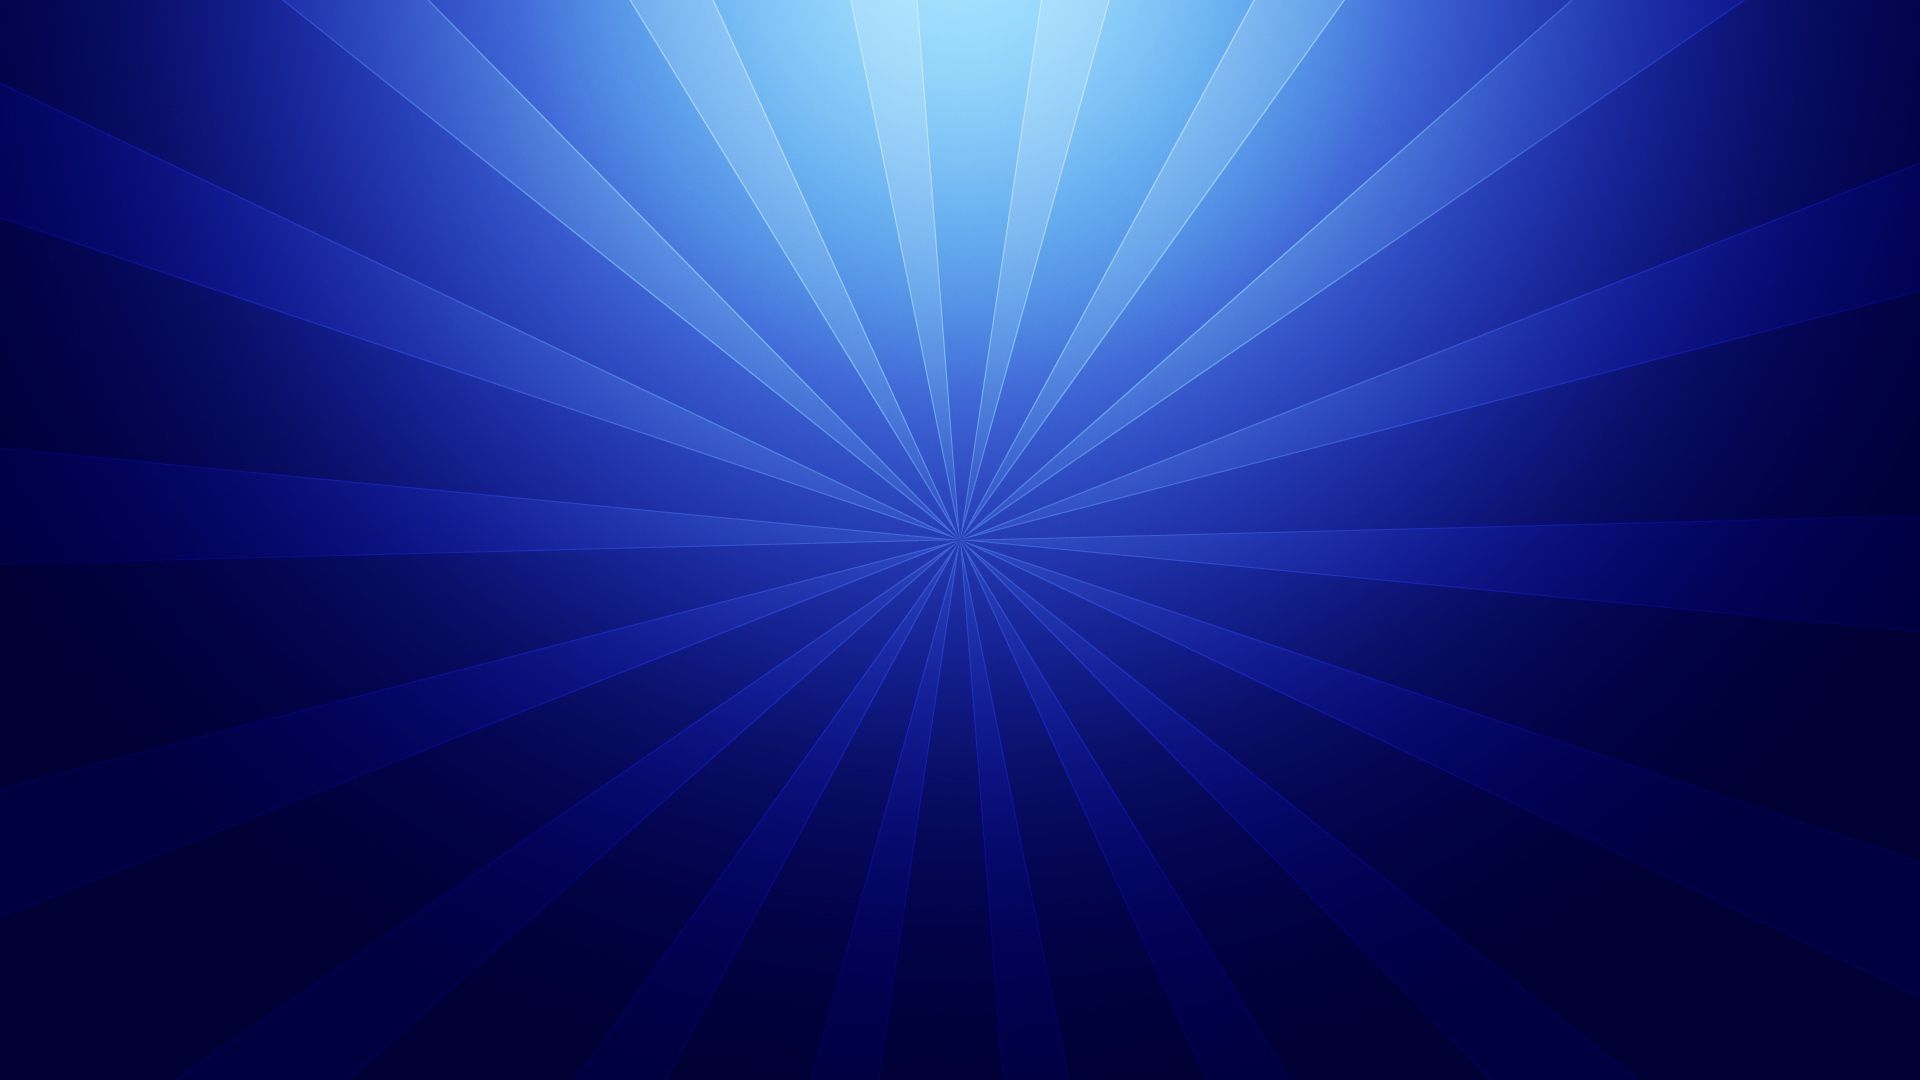 Download Wallpaper 1920x1080 Abstract, Blue, Rays, Line, Creative ...